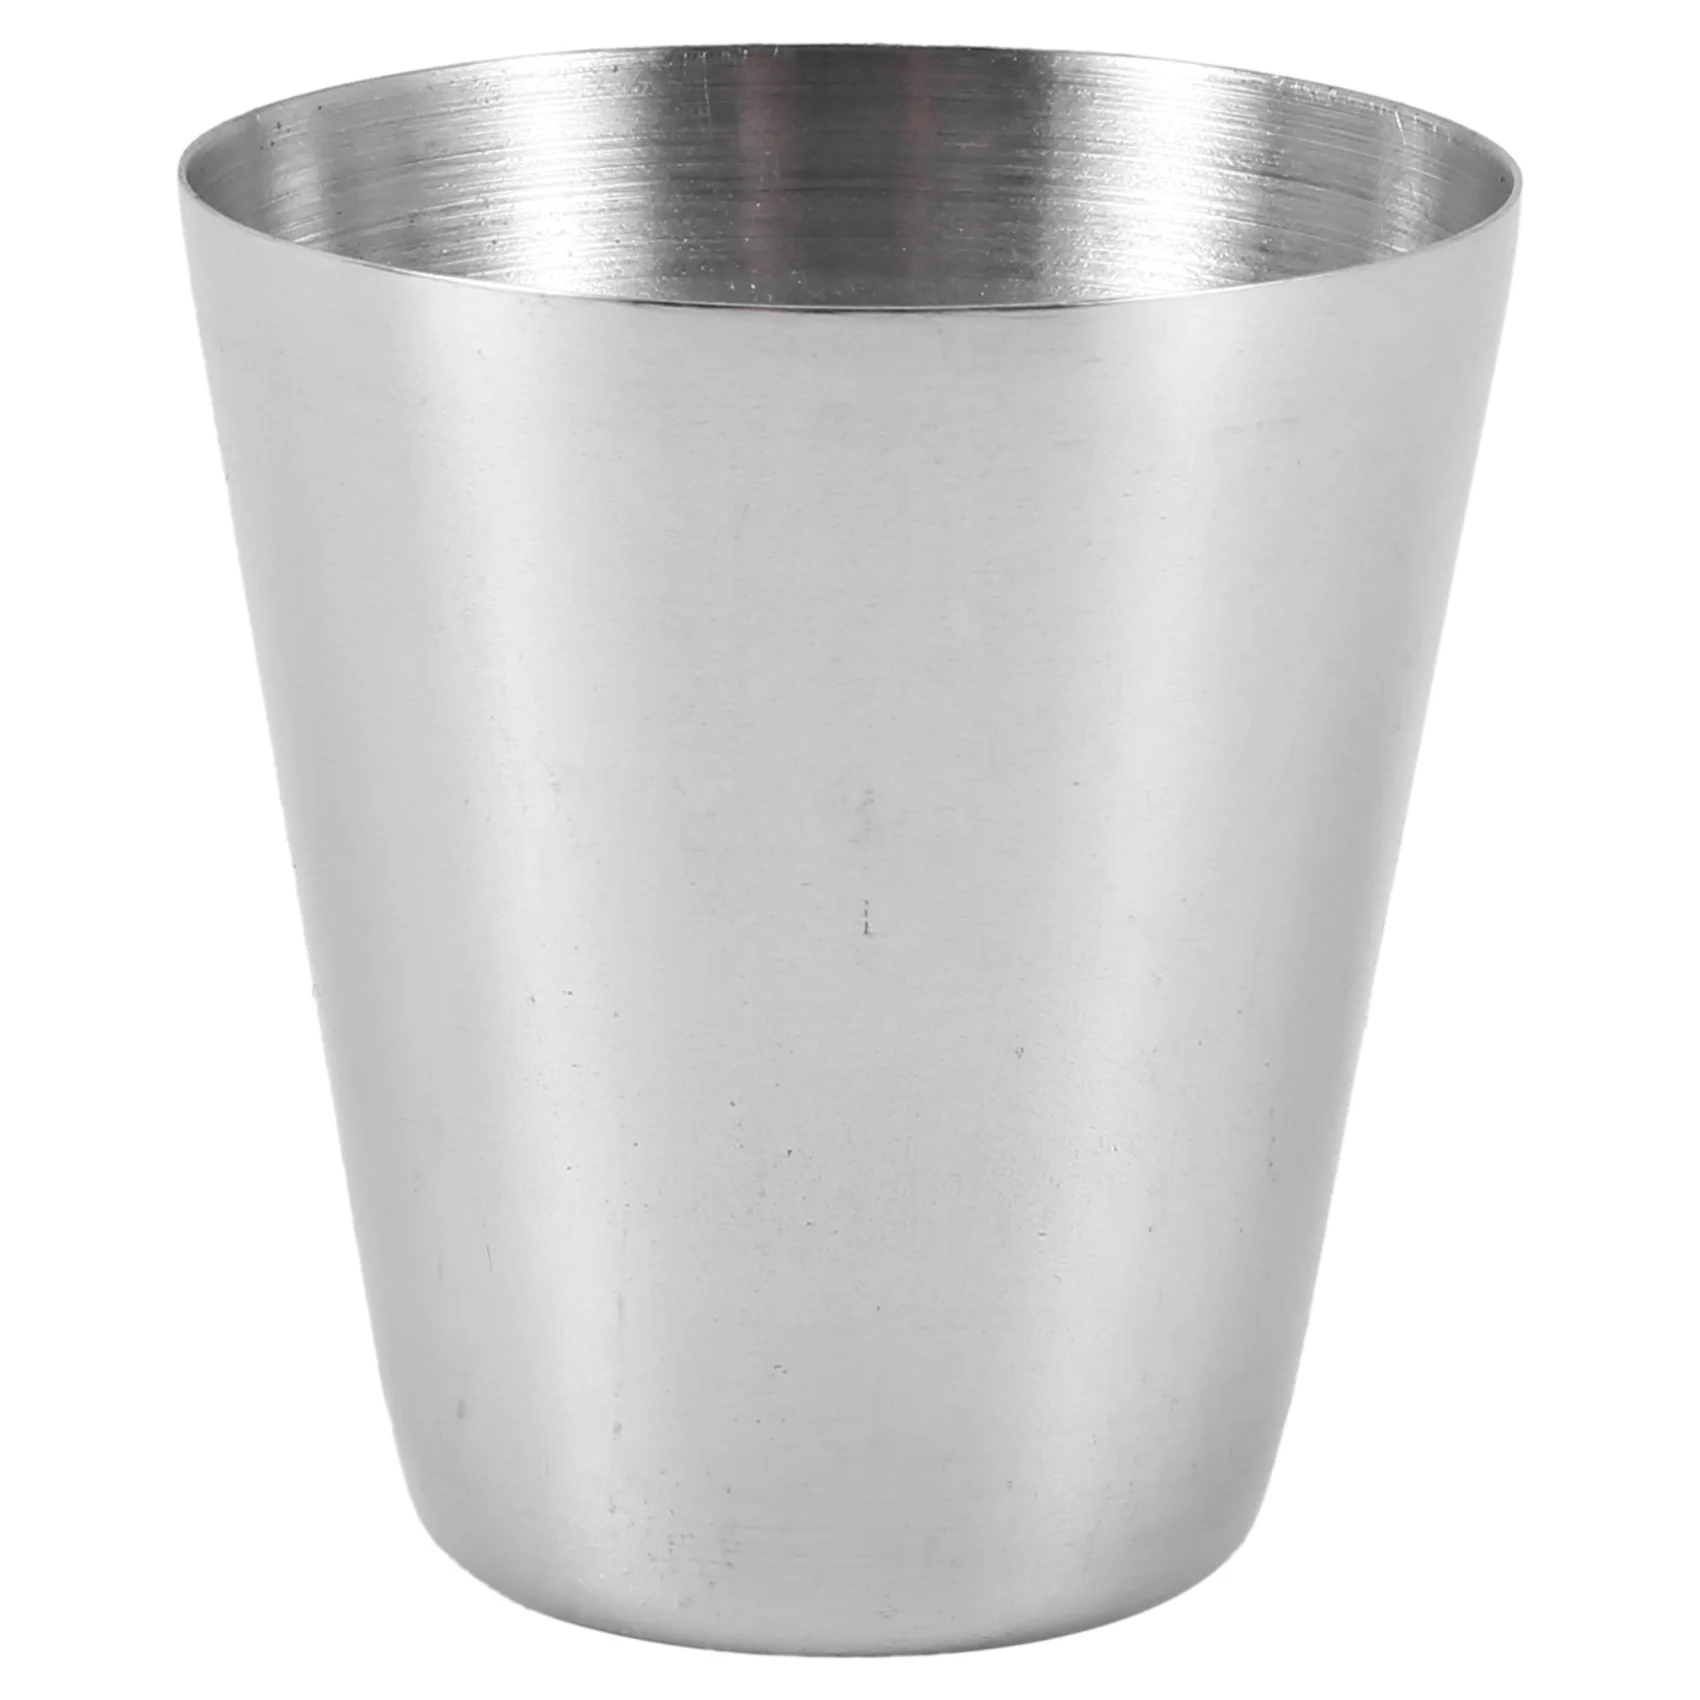 

15 Pcs Stainless Steel Shot Glasses Drinking Vessel,30Ml(1Oz) Camping Travel Coffee Tea Cup,for Whiskey Tequila Liquor